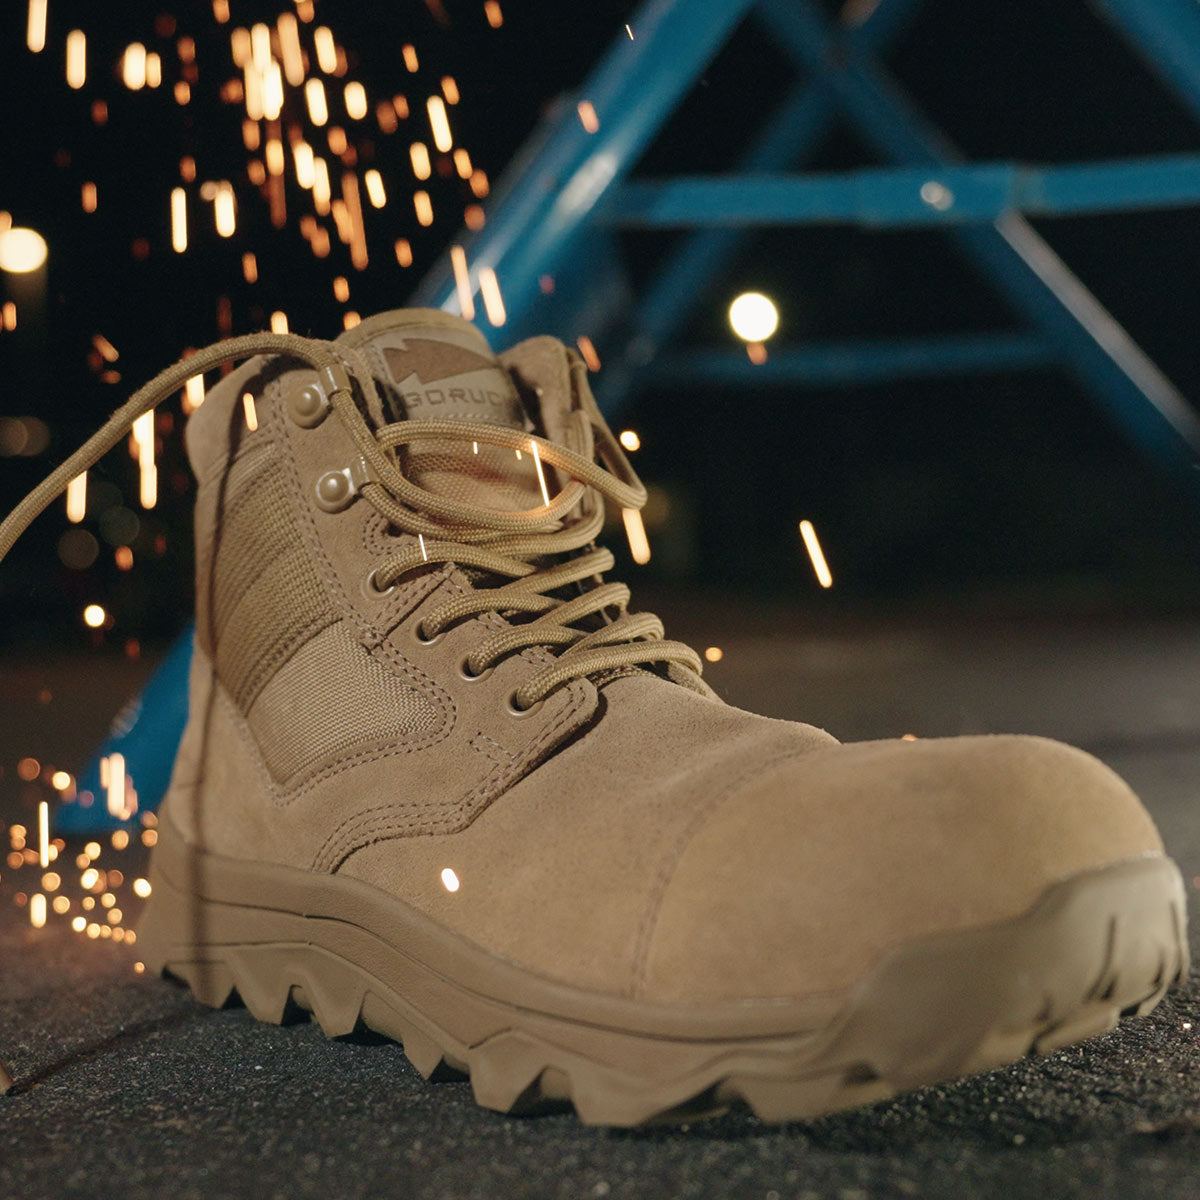 MACV-2 Safety Boot - Mid Top